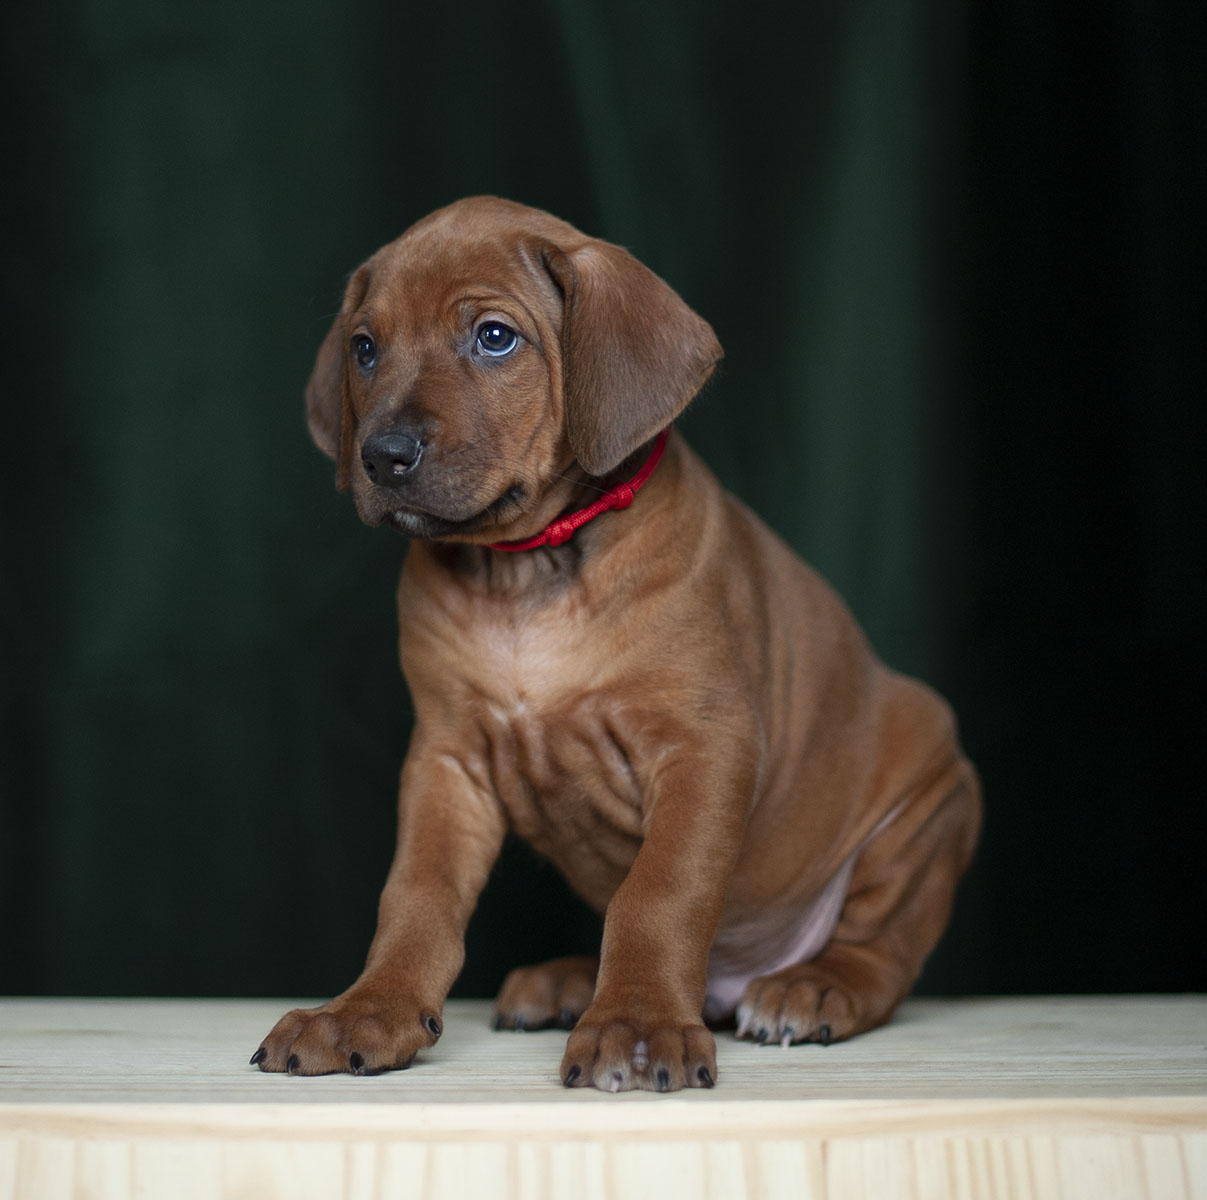 Rhodesian Ridgeback puppy in the midwest